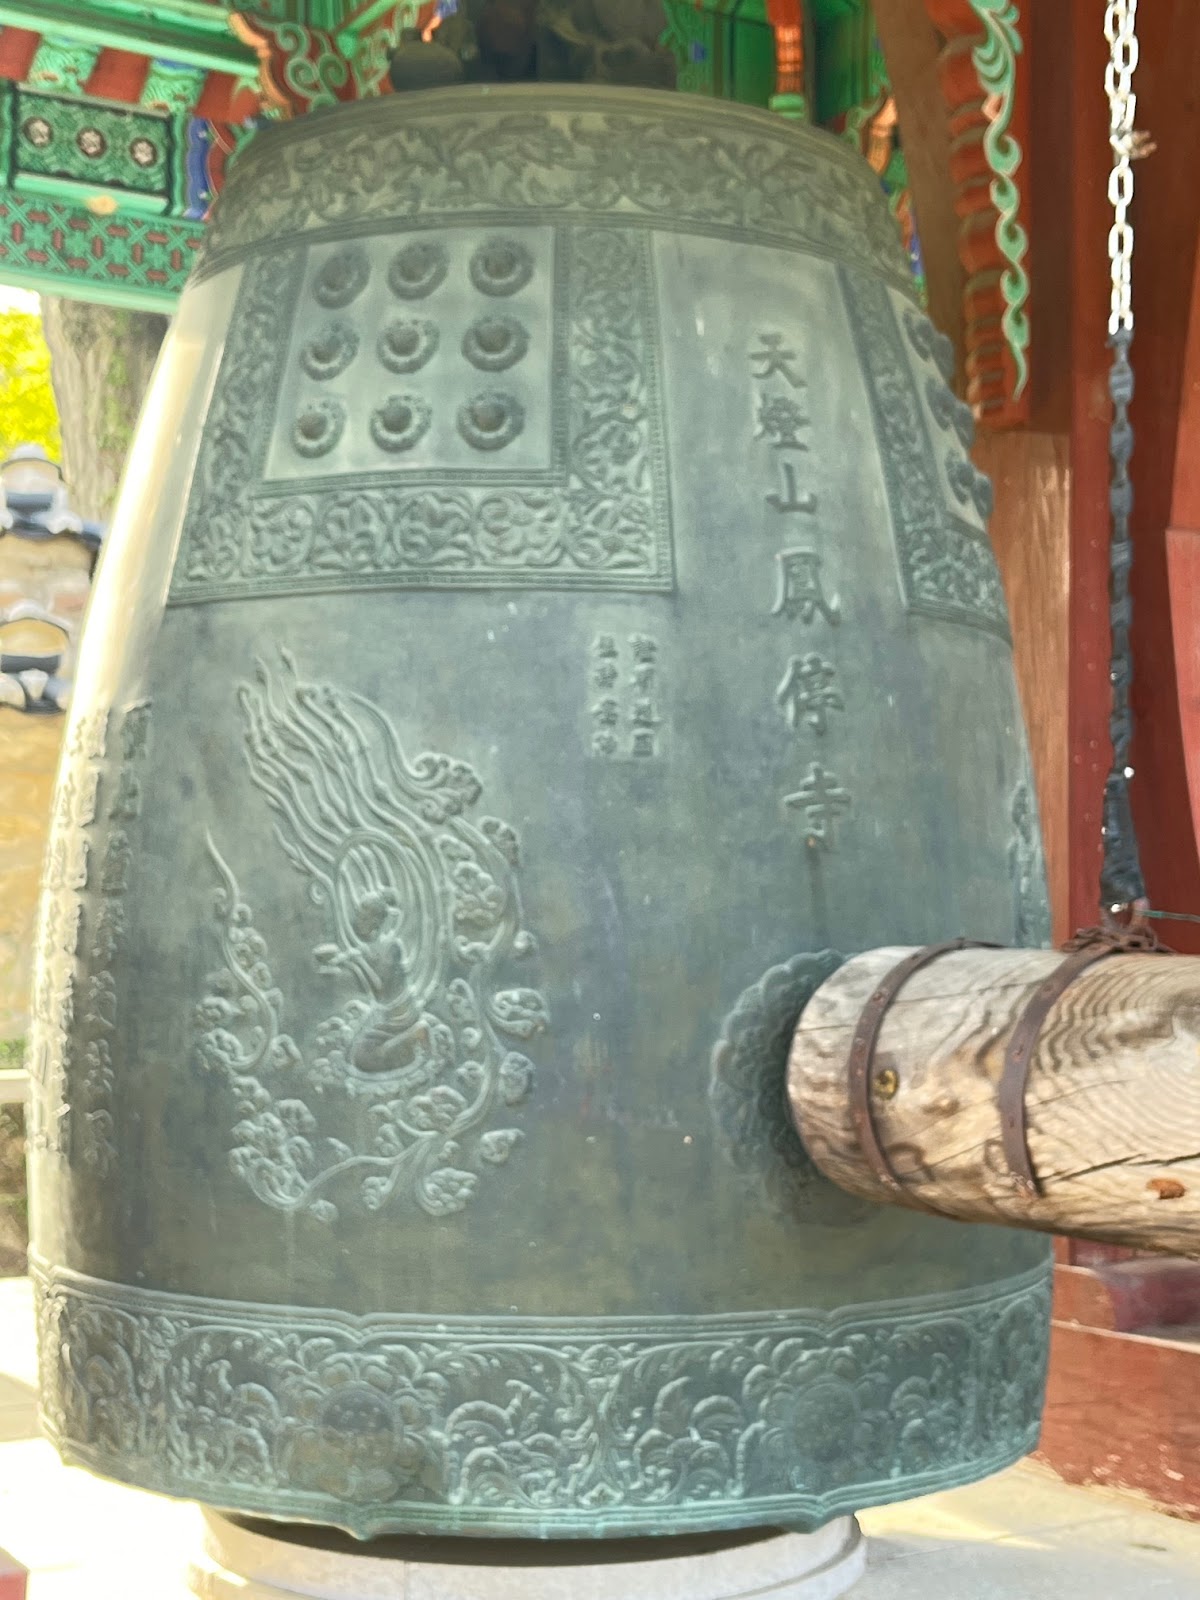 Upclose engravings on the bell. At the oldest temple near Andong, South Korea.